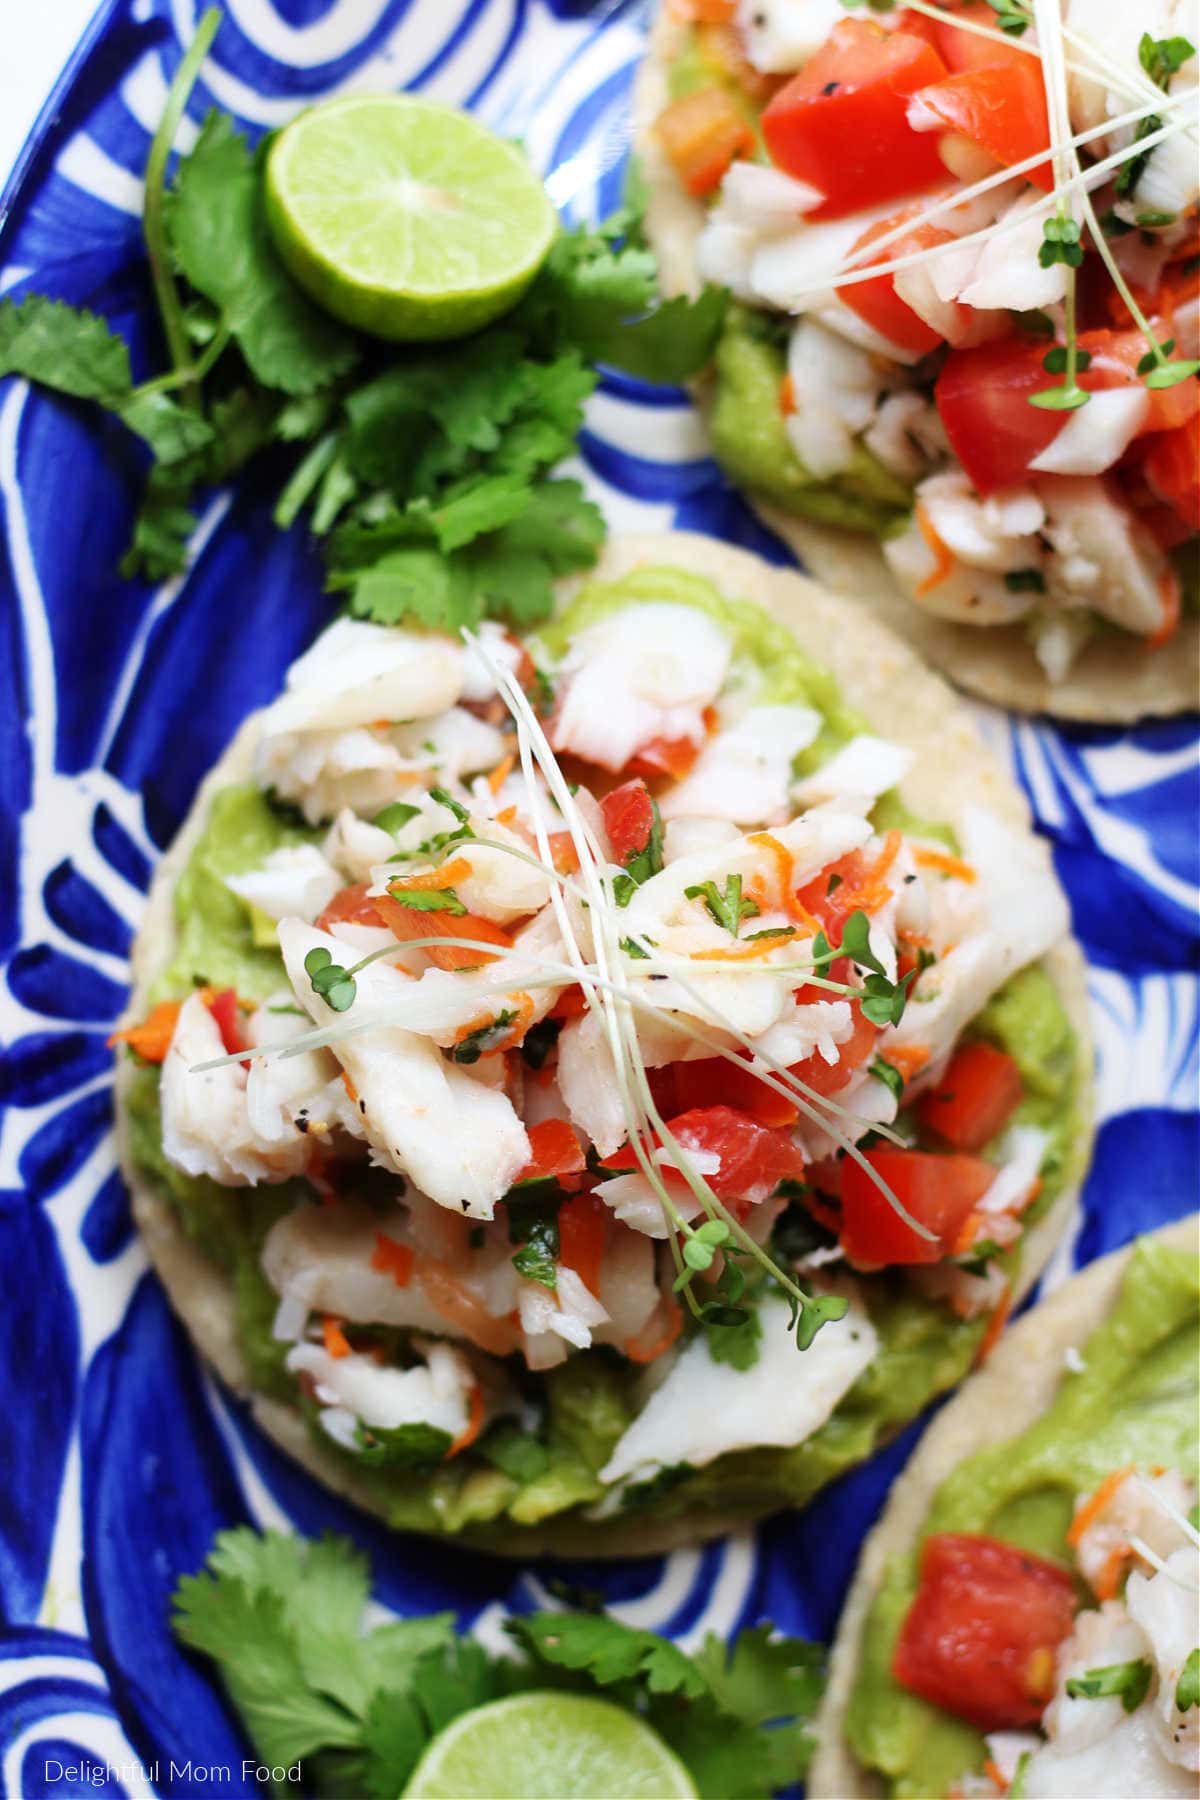 recipe for white fish ceviche served on a tostada with homemade guacamole